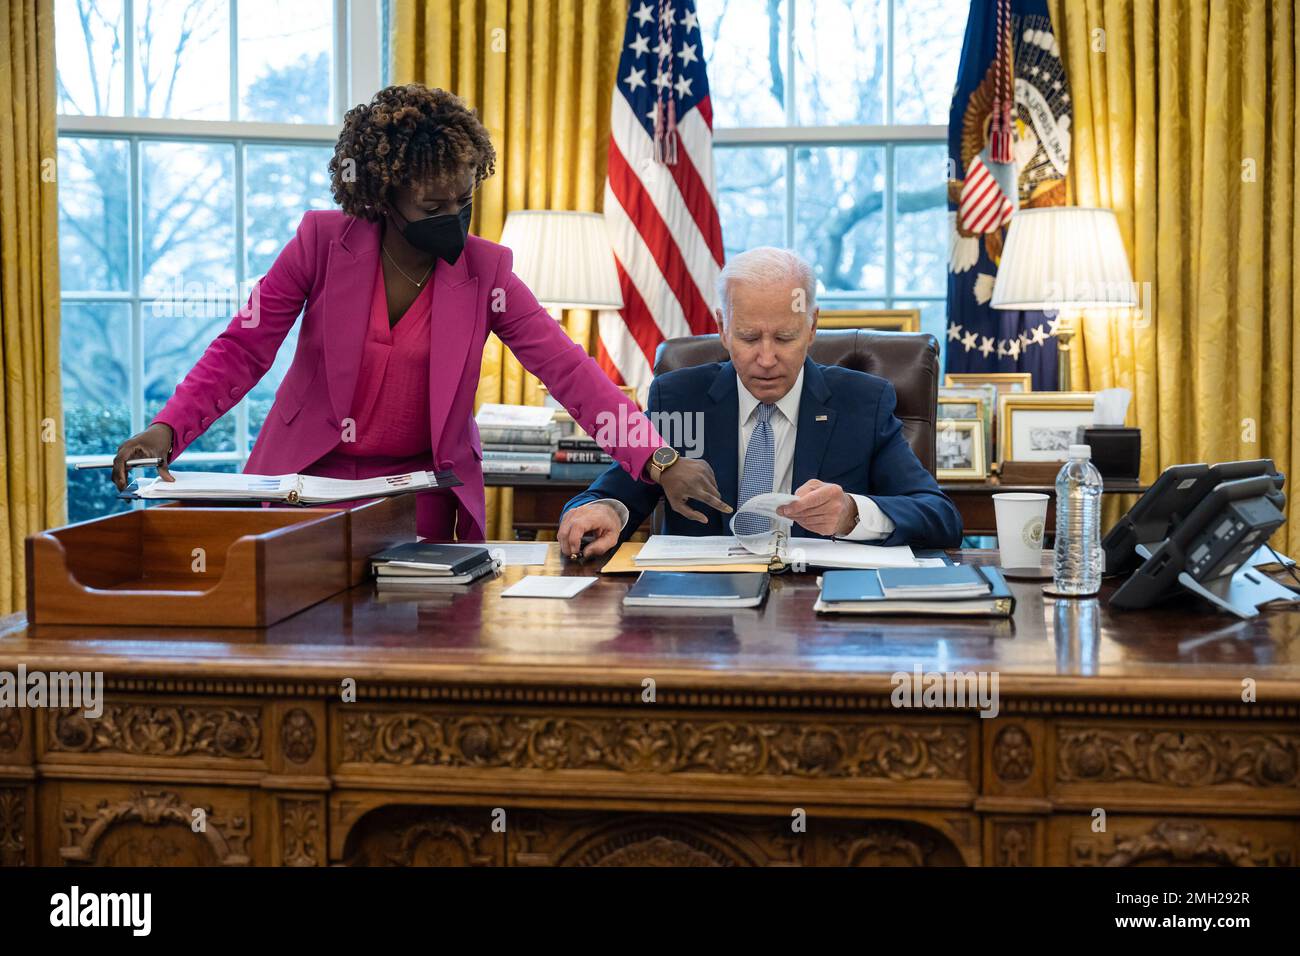 President Joe Biden confers with Press Secretary Karine Jean-Pierre during a daily press meeting, Friday, January 6, 2023, in the Oval Office. (Official White House Photo by Adam Schultz) Stock Photo